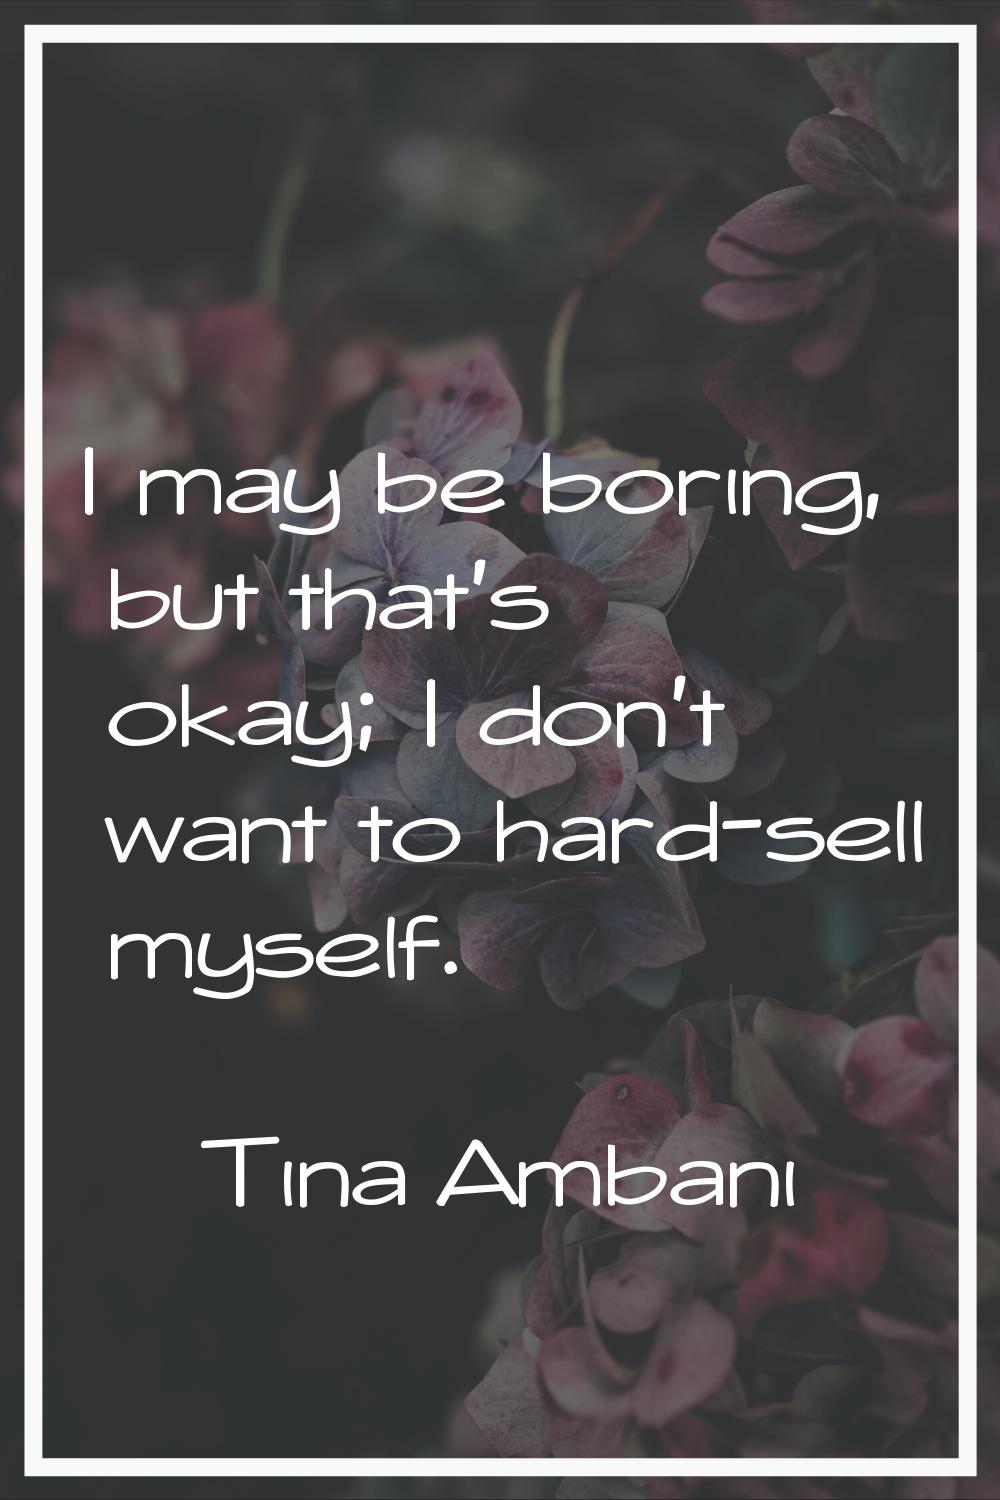 I may be boring, but that's okay; I don't want to hard-sell myself.